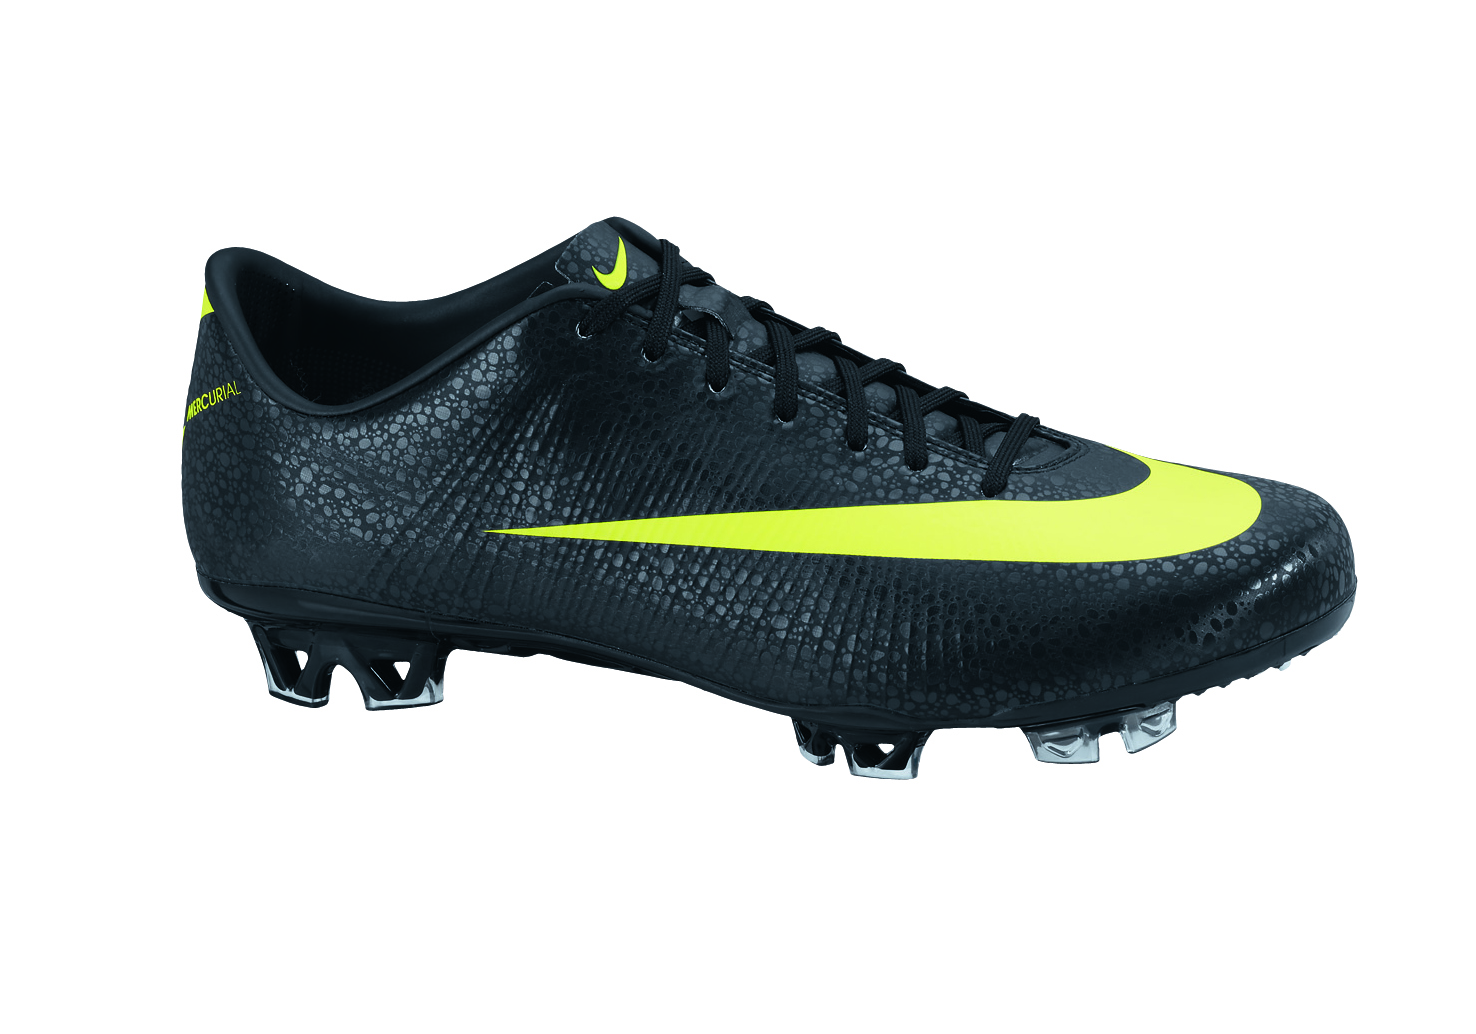 Nike CR7 Safari Superfly III – Black with Volt Review